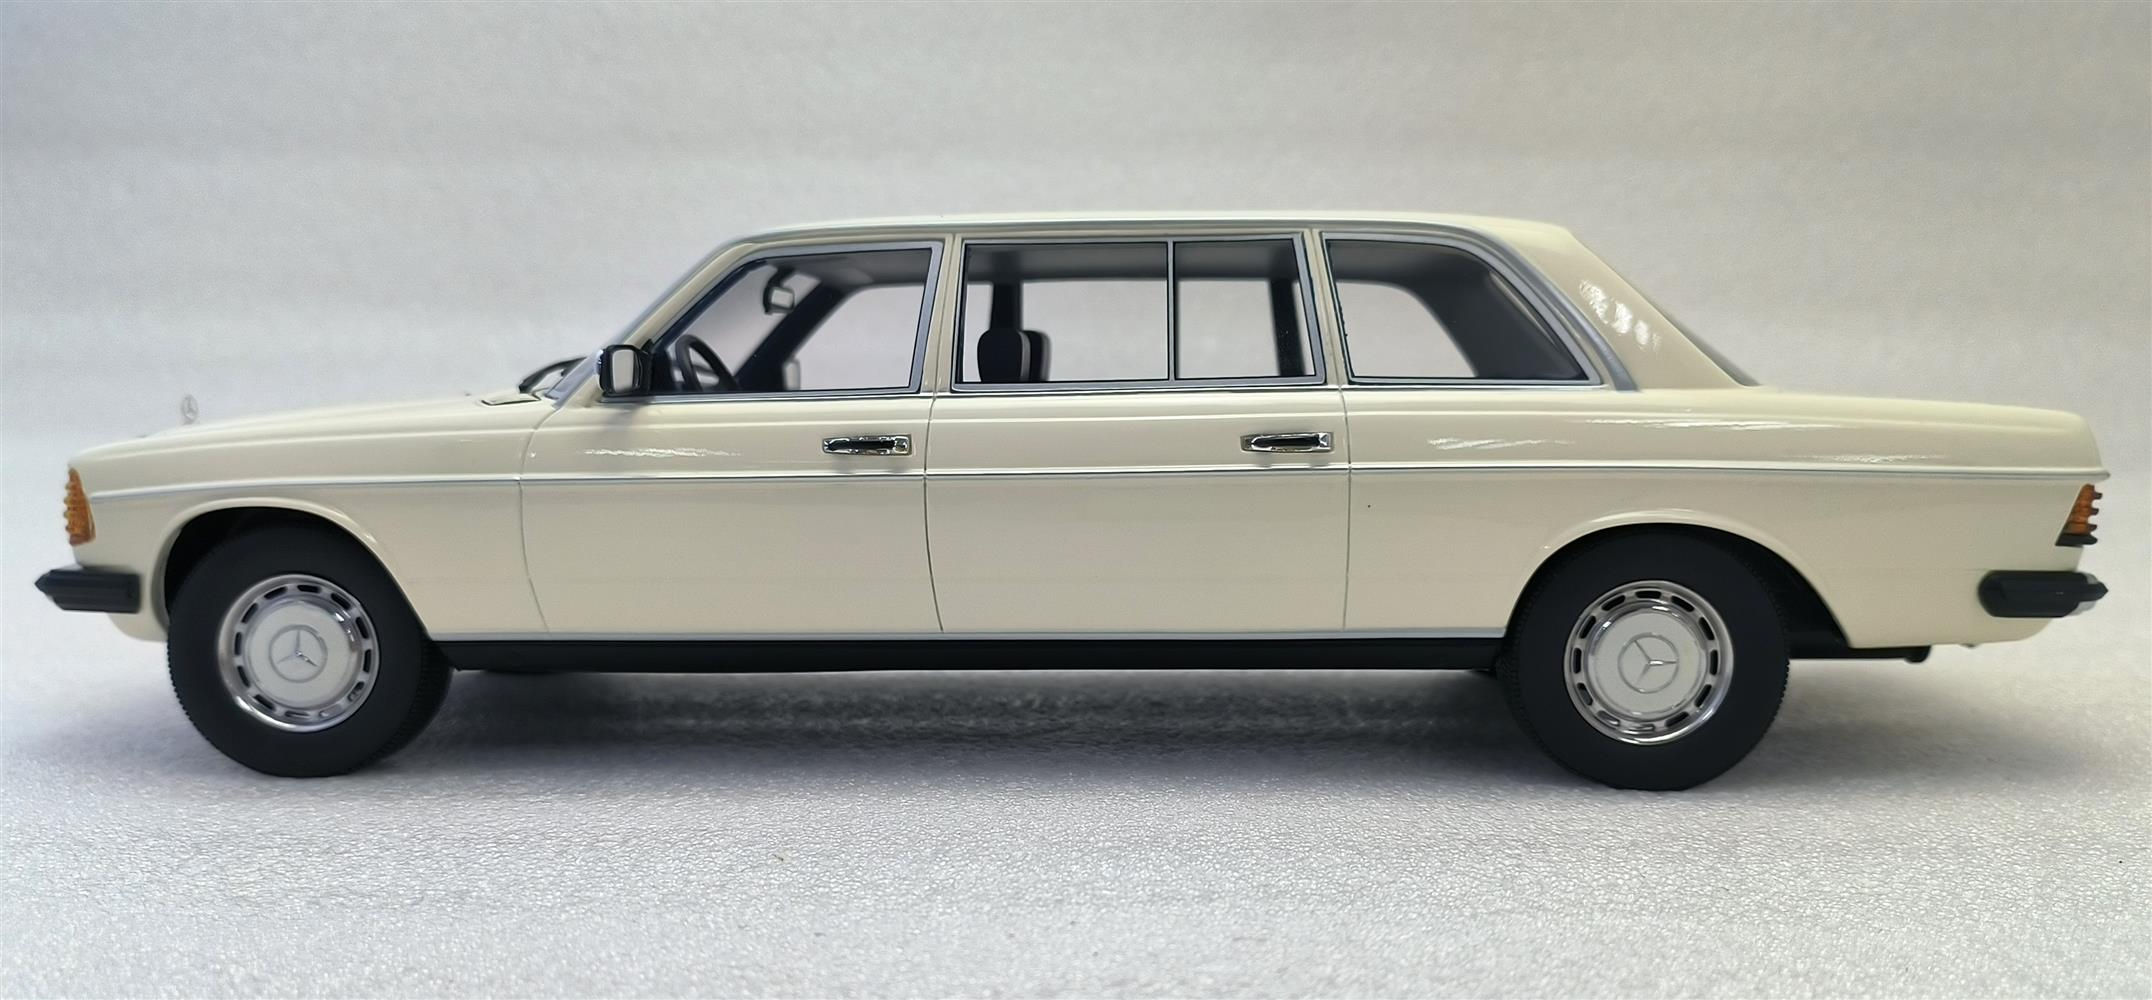 Mercedes-Benz W123 Lang white 1978 1:18 Cult Scale Models